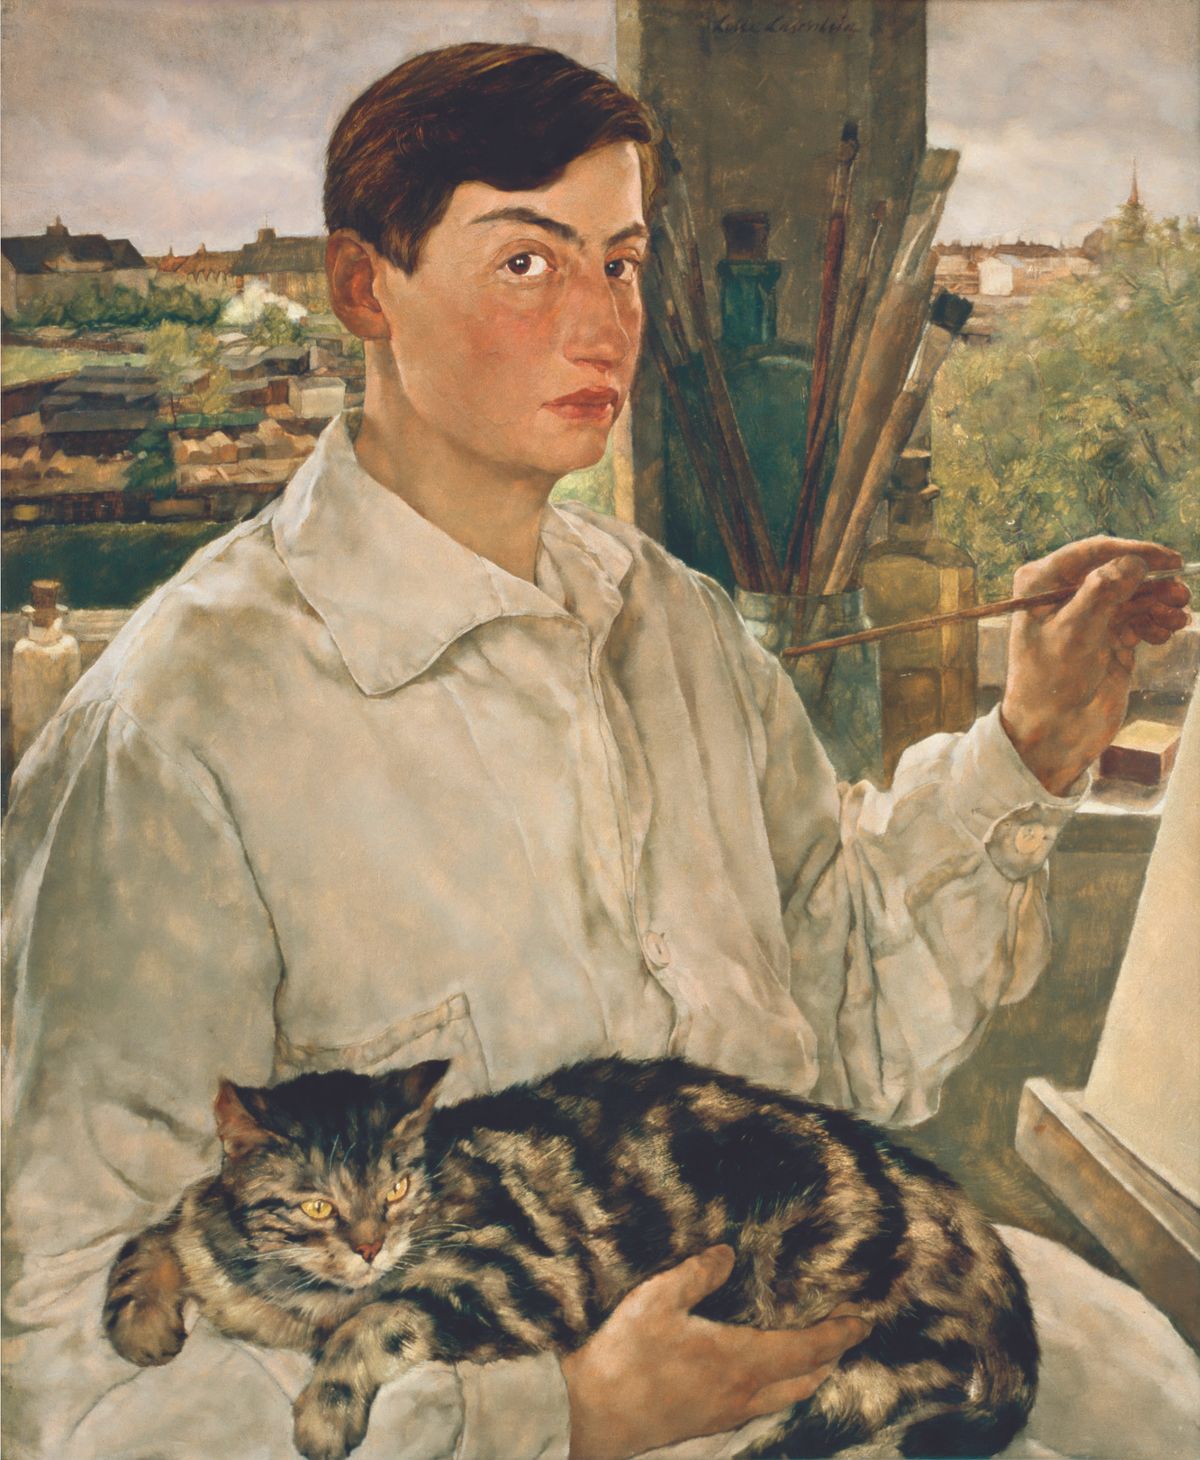 Lotte Laserstein’s Self-Portrait with a Cat (1928), one of around 85 paintings going on show © Lotte Laserstein Archiv Krausse Berlin Modernamuseet